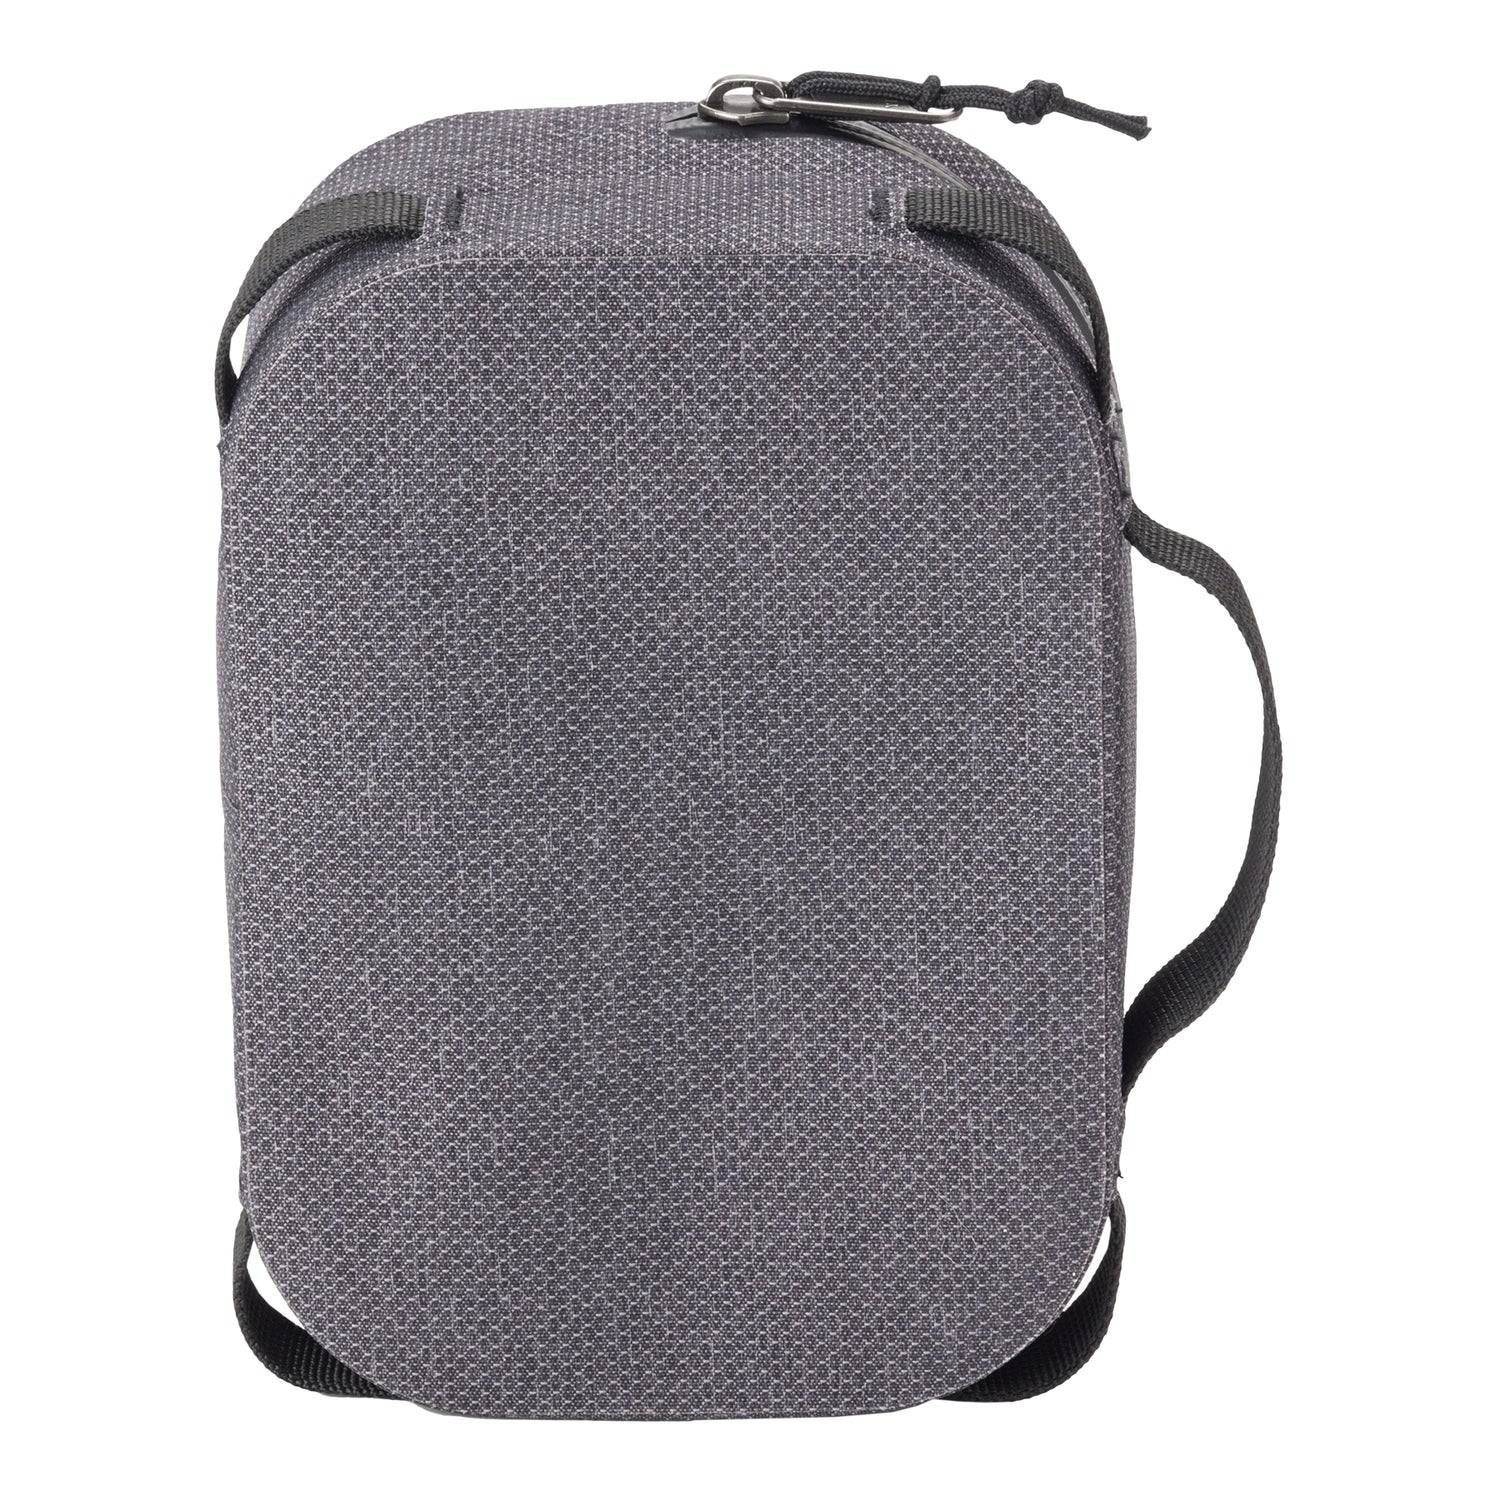 PACK-IT™ Dry Cube S - GRAPHITE